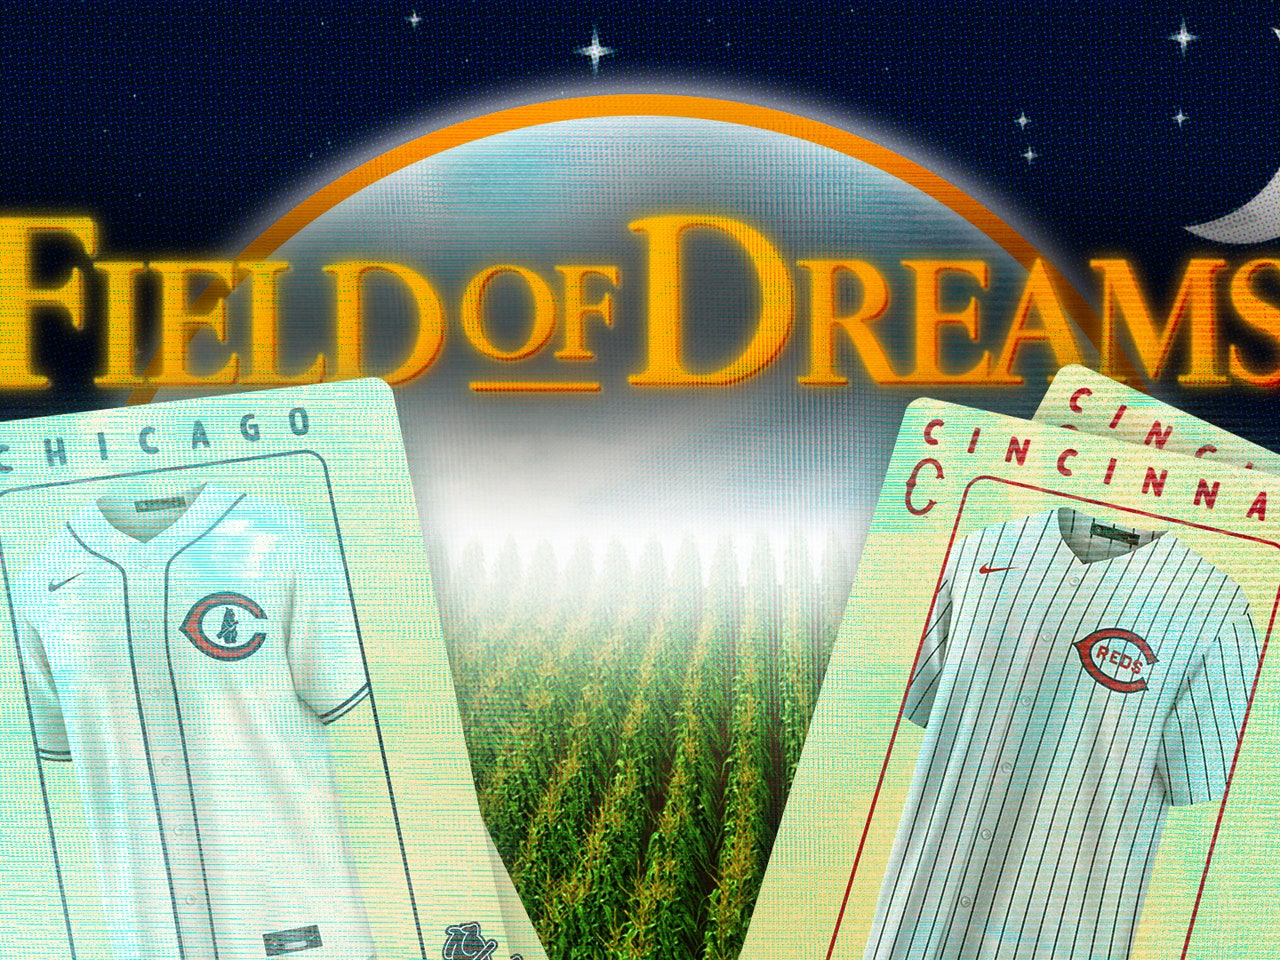 Cubs, Reds will wear these uniforms for Field of Dreams Game